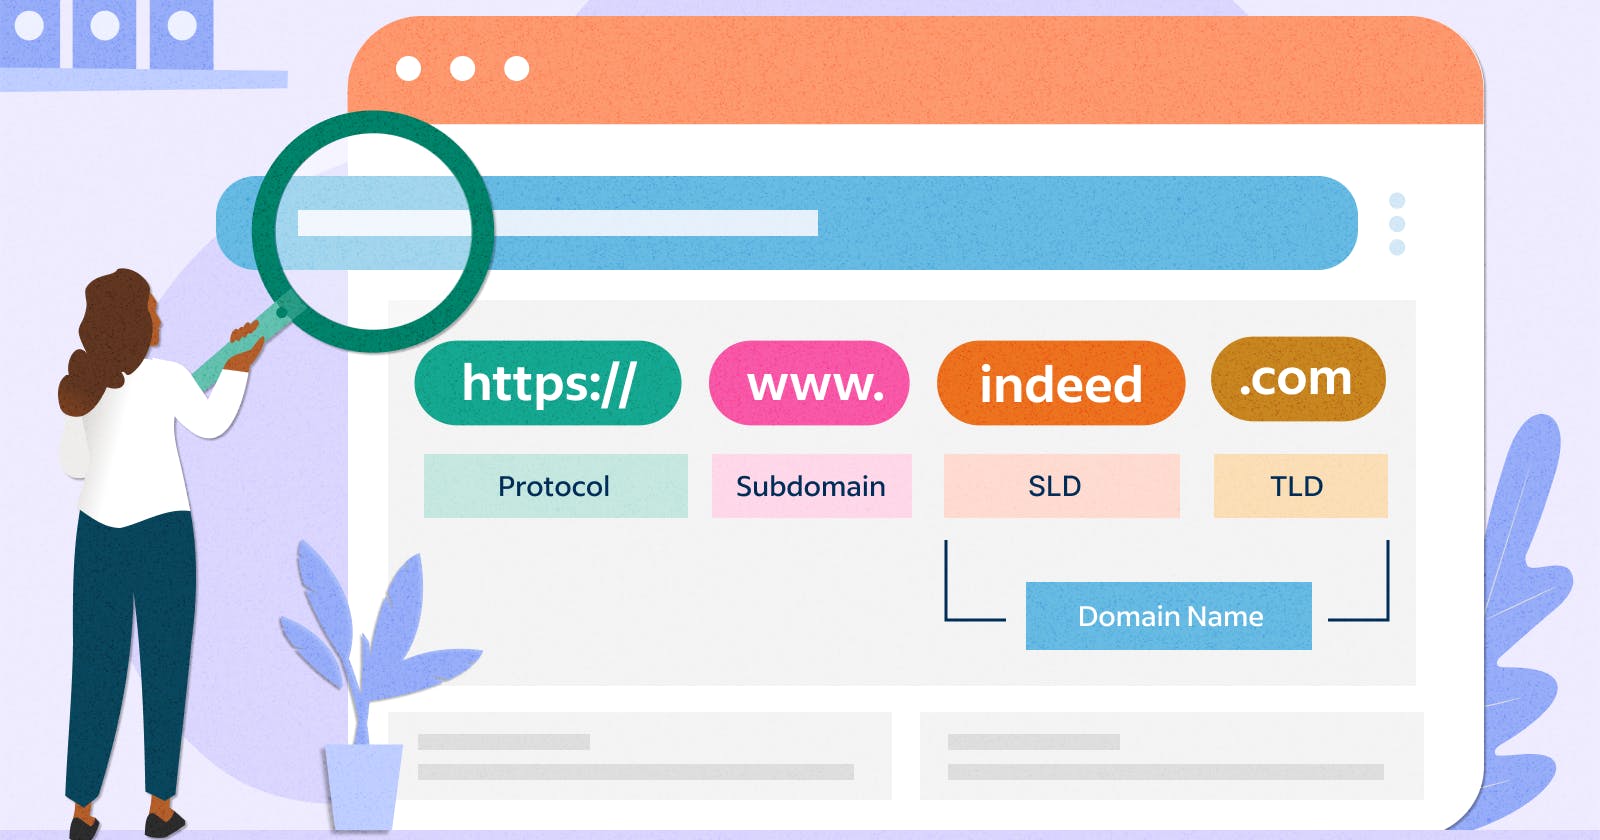 What is a Domain? How many types of Domain? - Learn about Domain